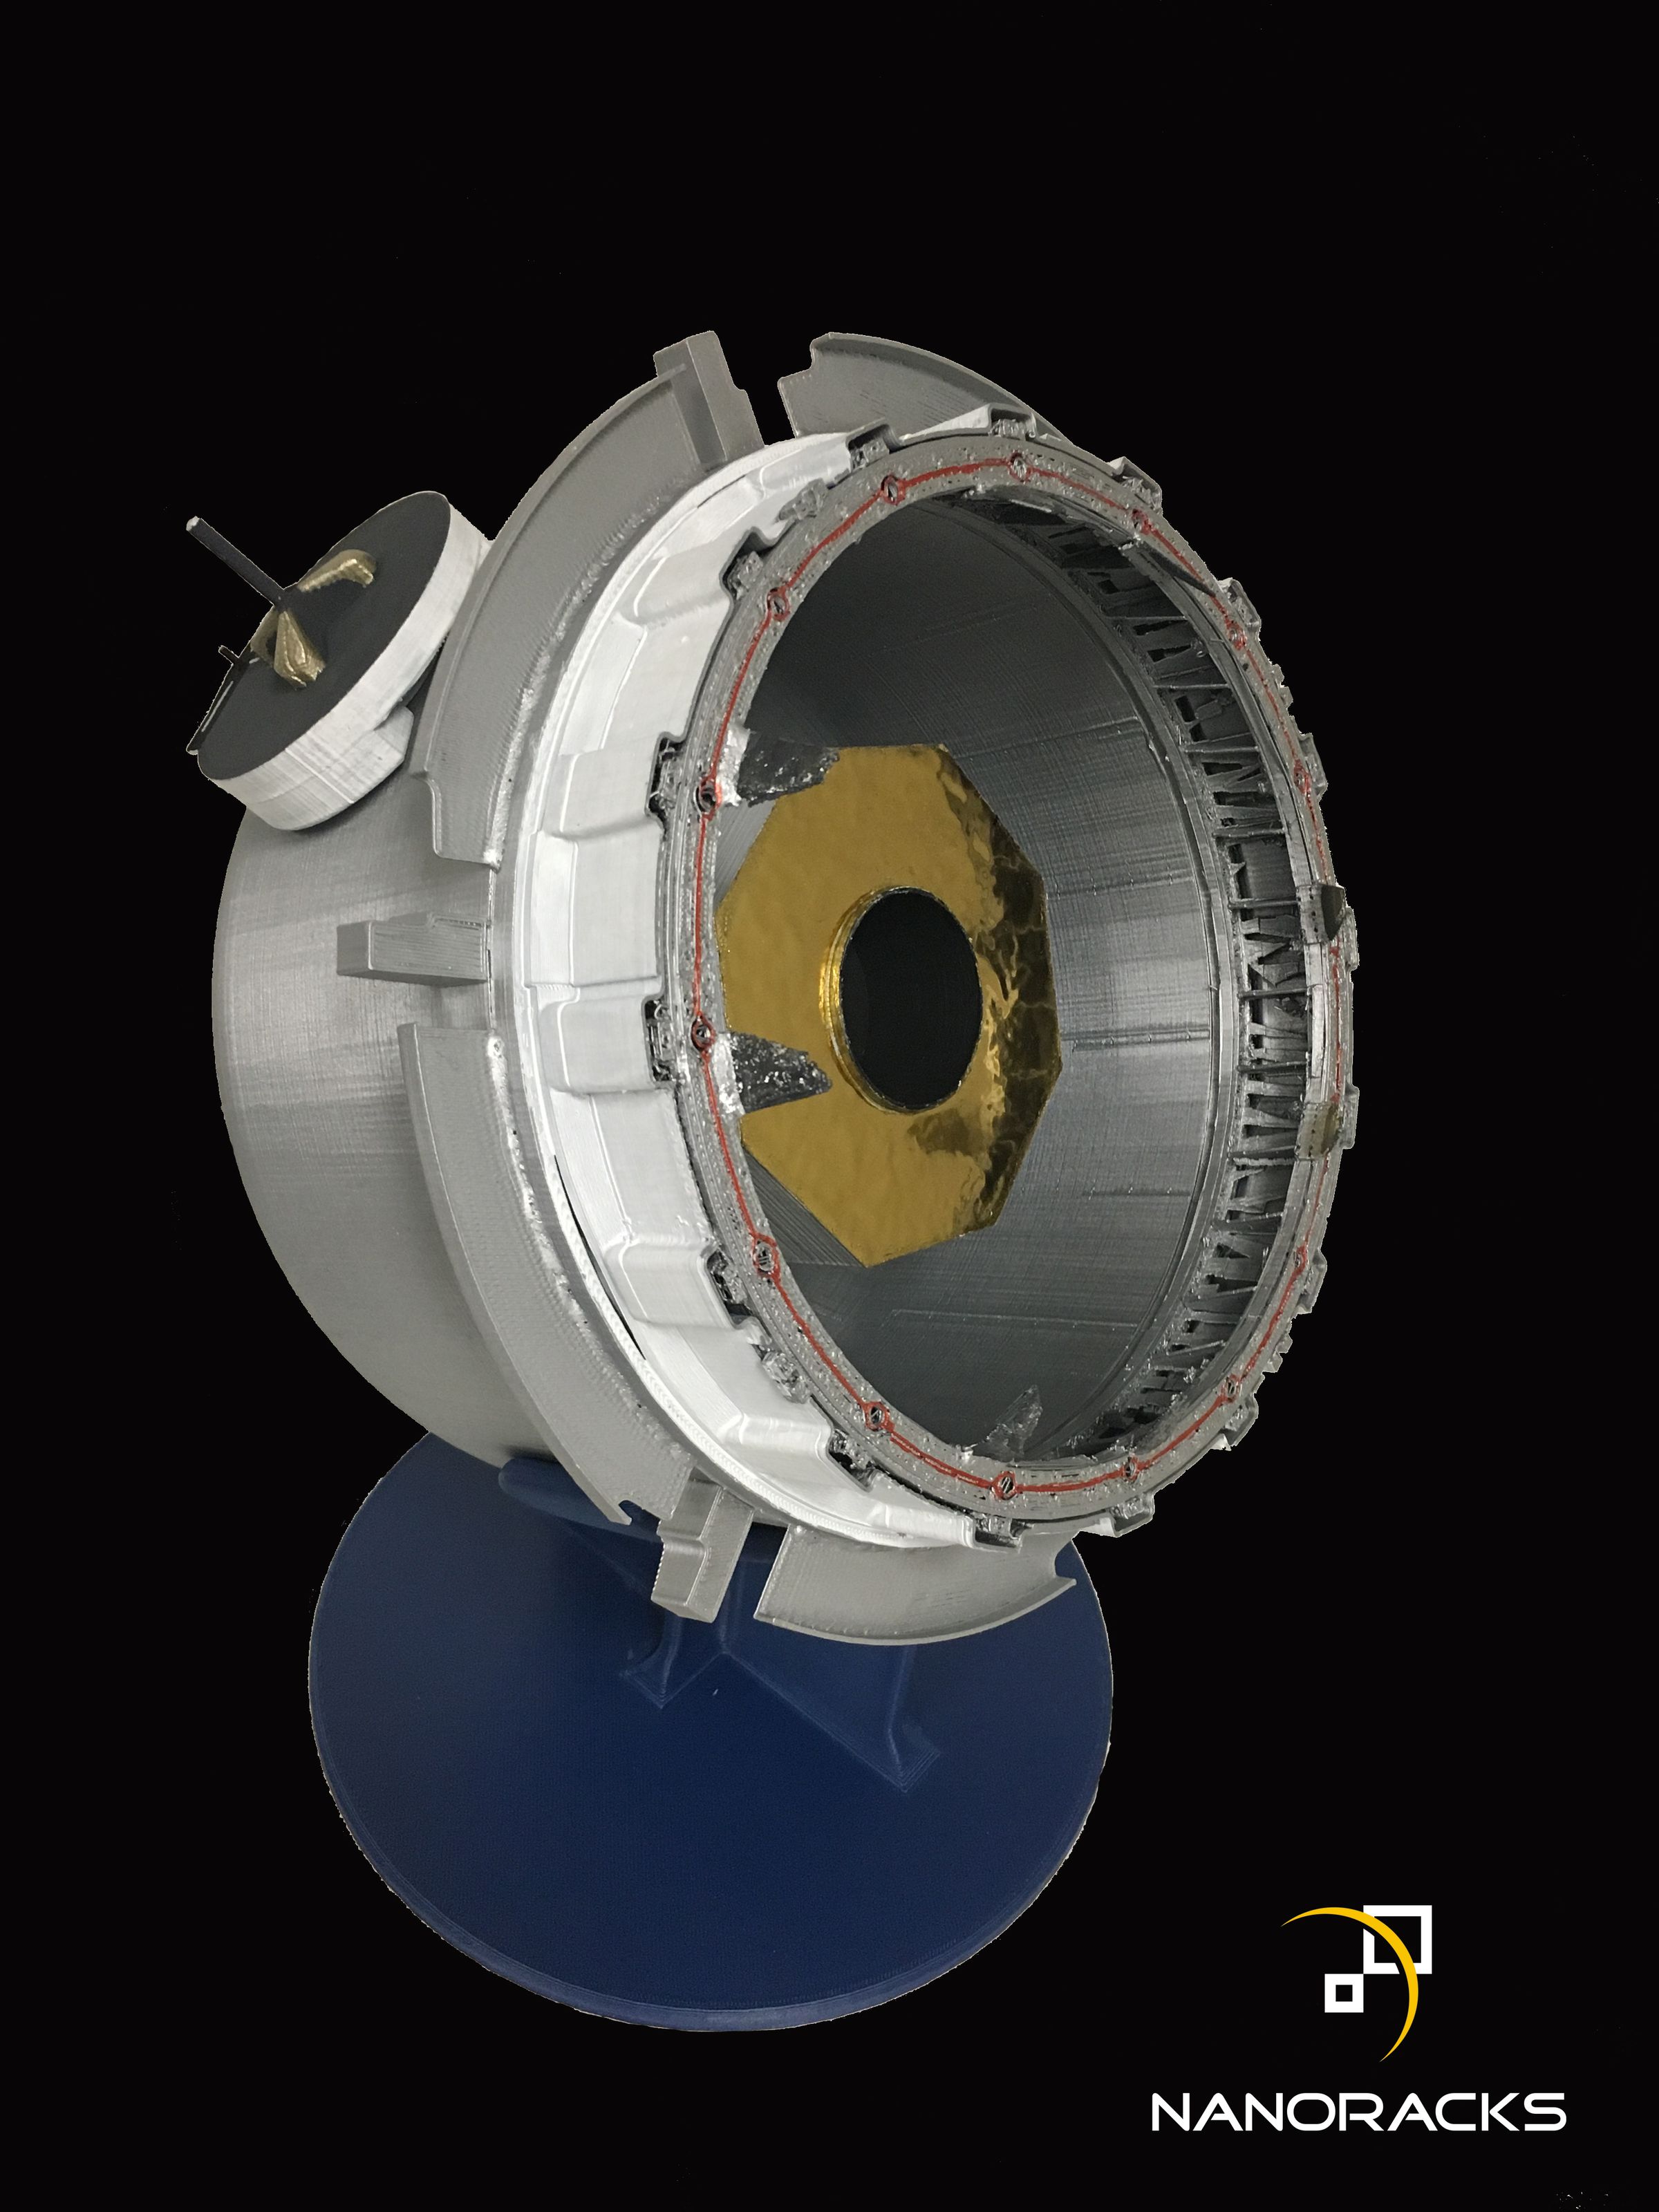 A model of the NanoRacks air lock, showing the opening that will be exposed to space.